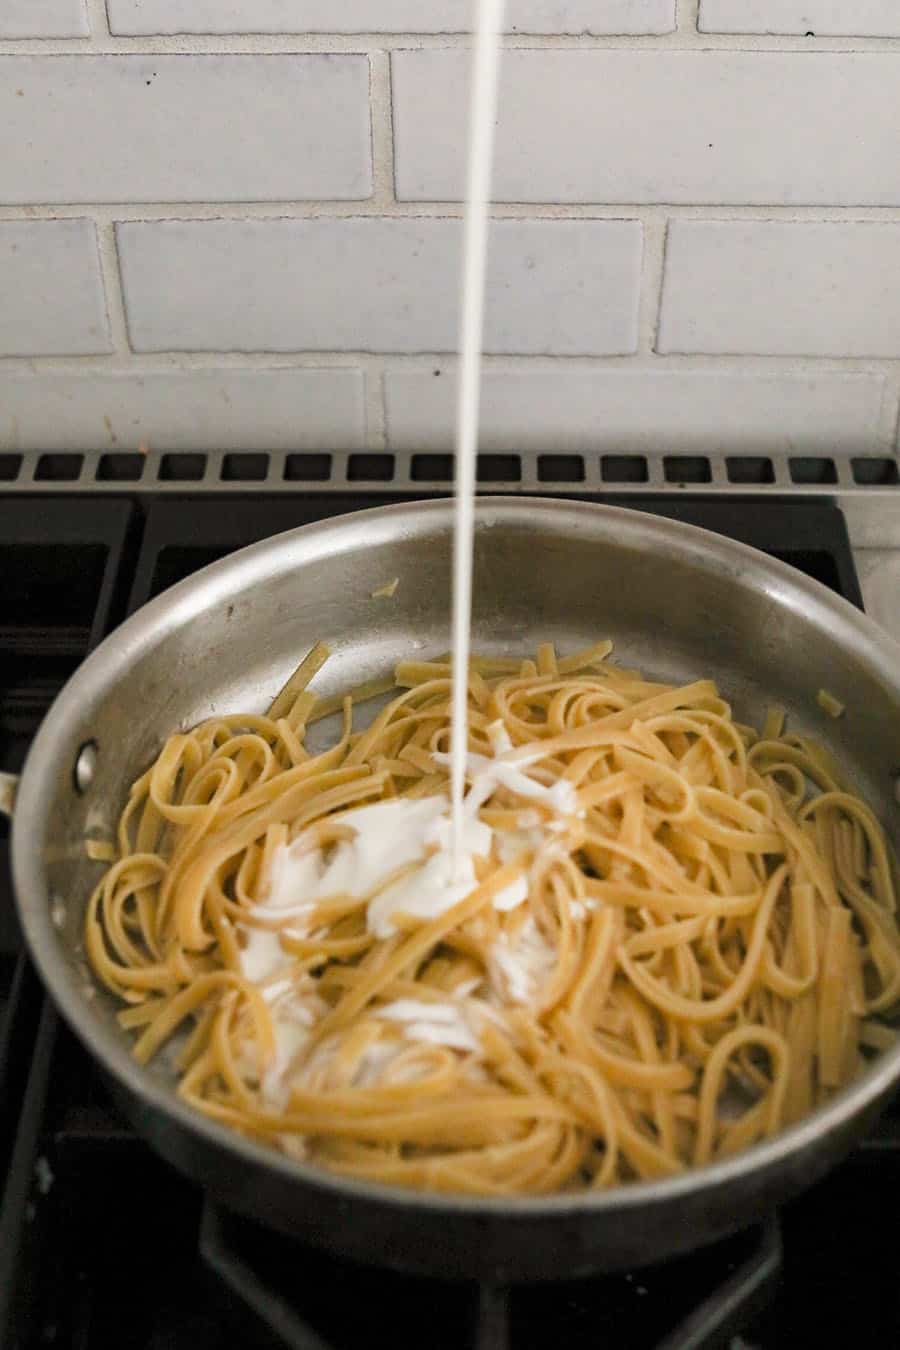 cream being poured over fettuccini noodles in a pan